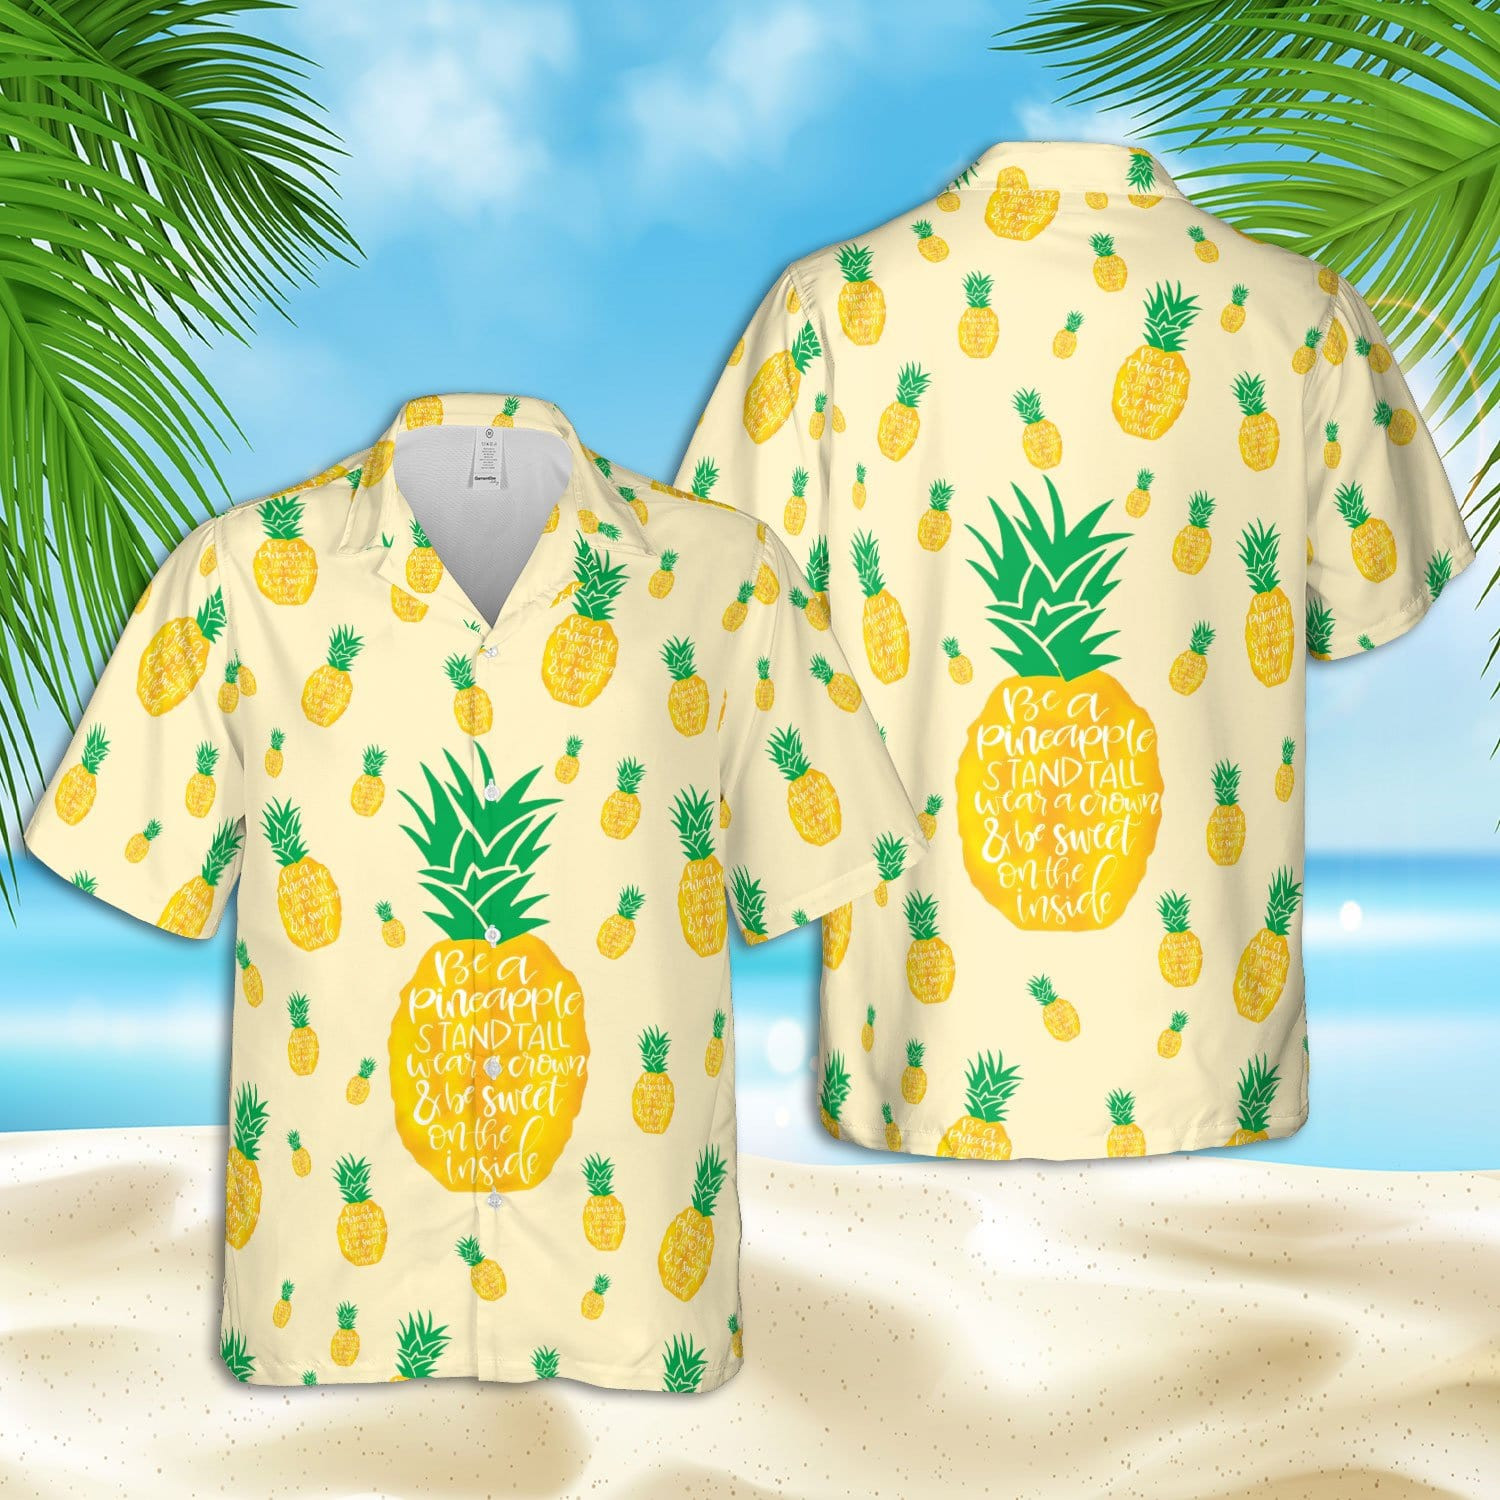 Be A Pineapple - Stand Tall Wear A Crown And Be Sweet Inside Hawaiian Shirts 28721Dh